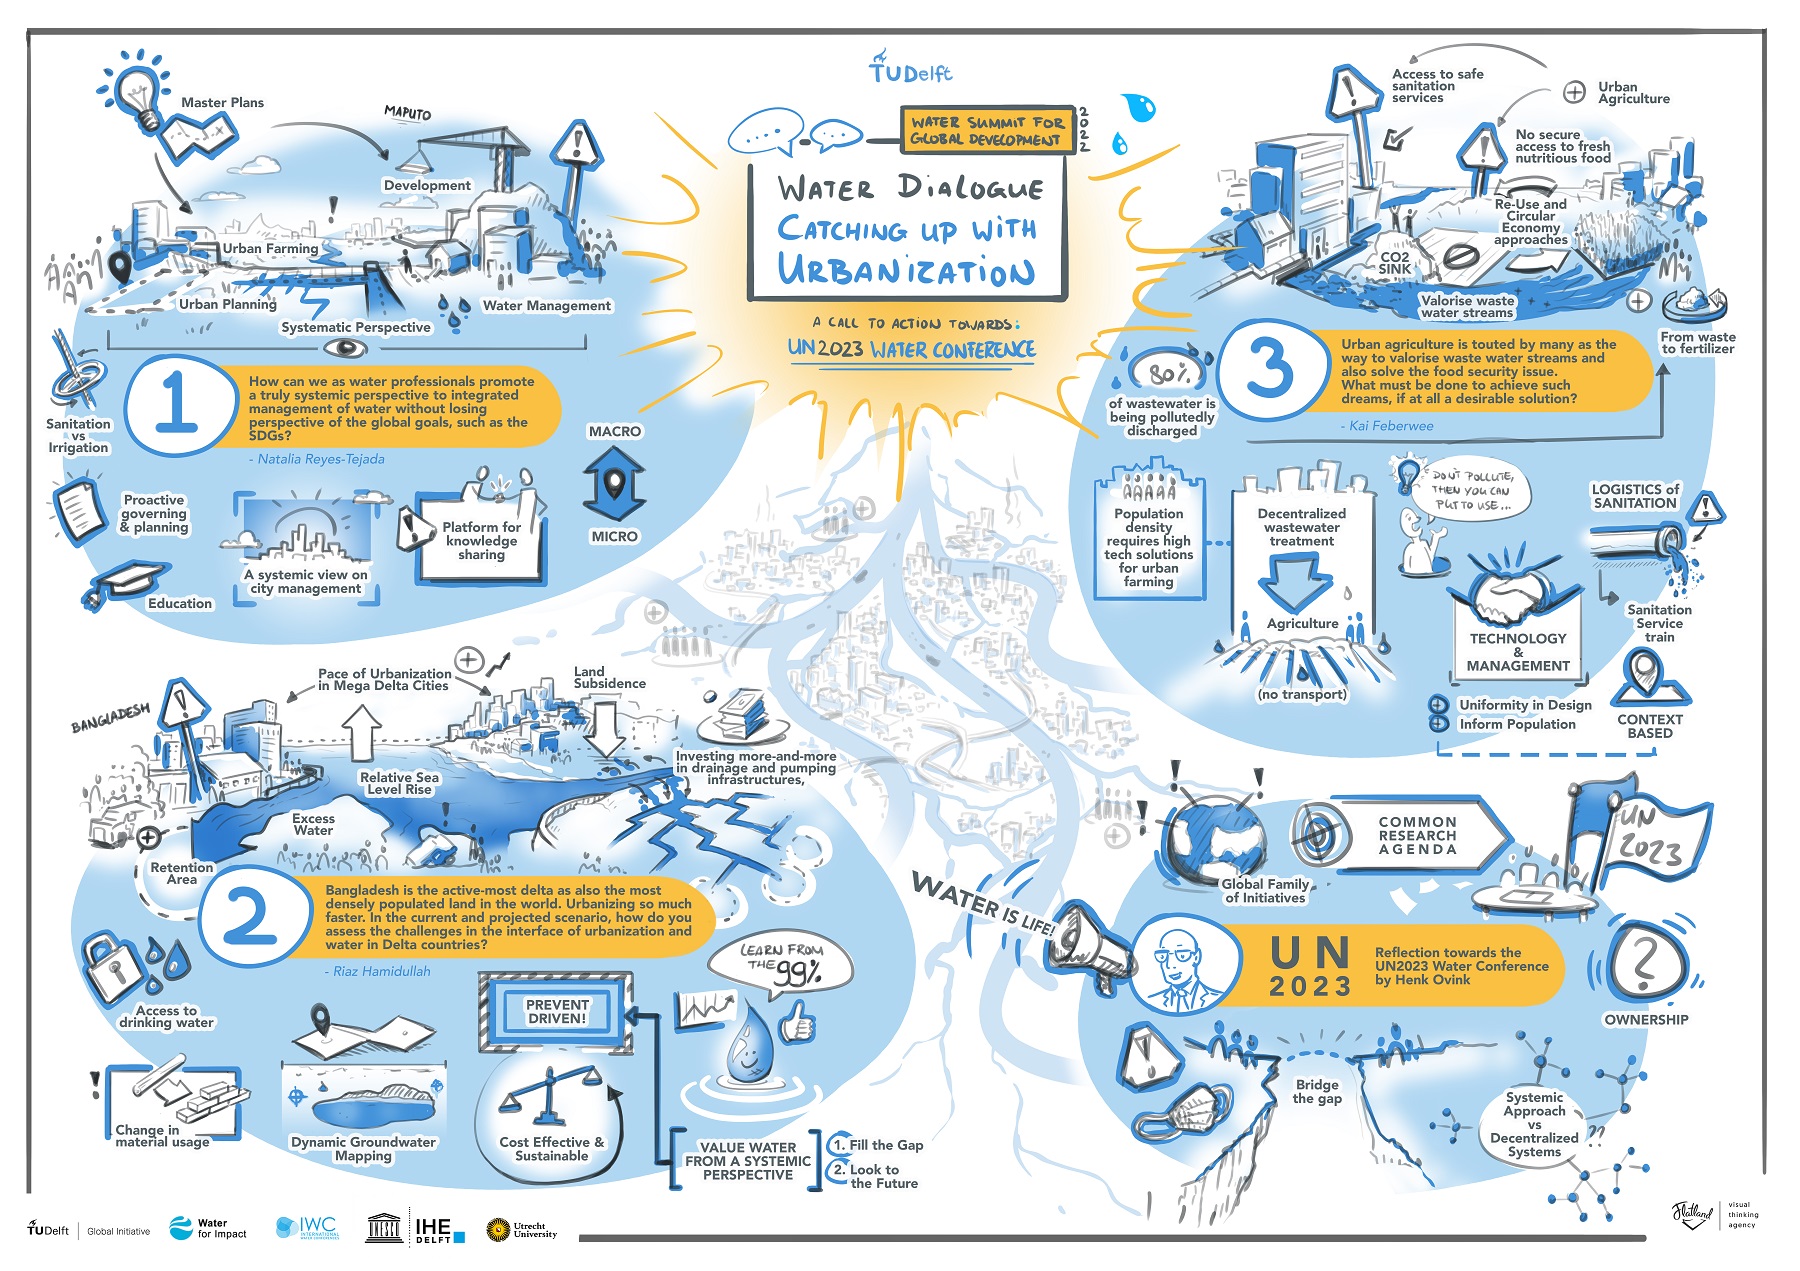 Water Dialogue Catching up with urbanization Visual Summary V1C